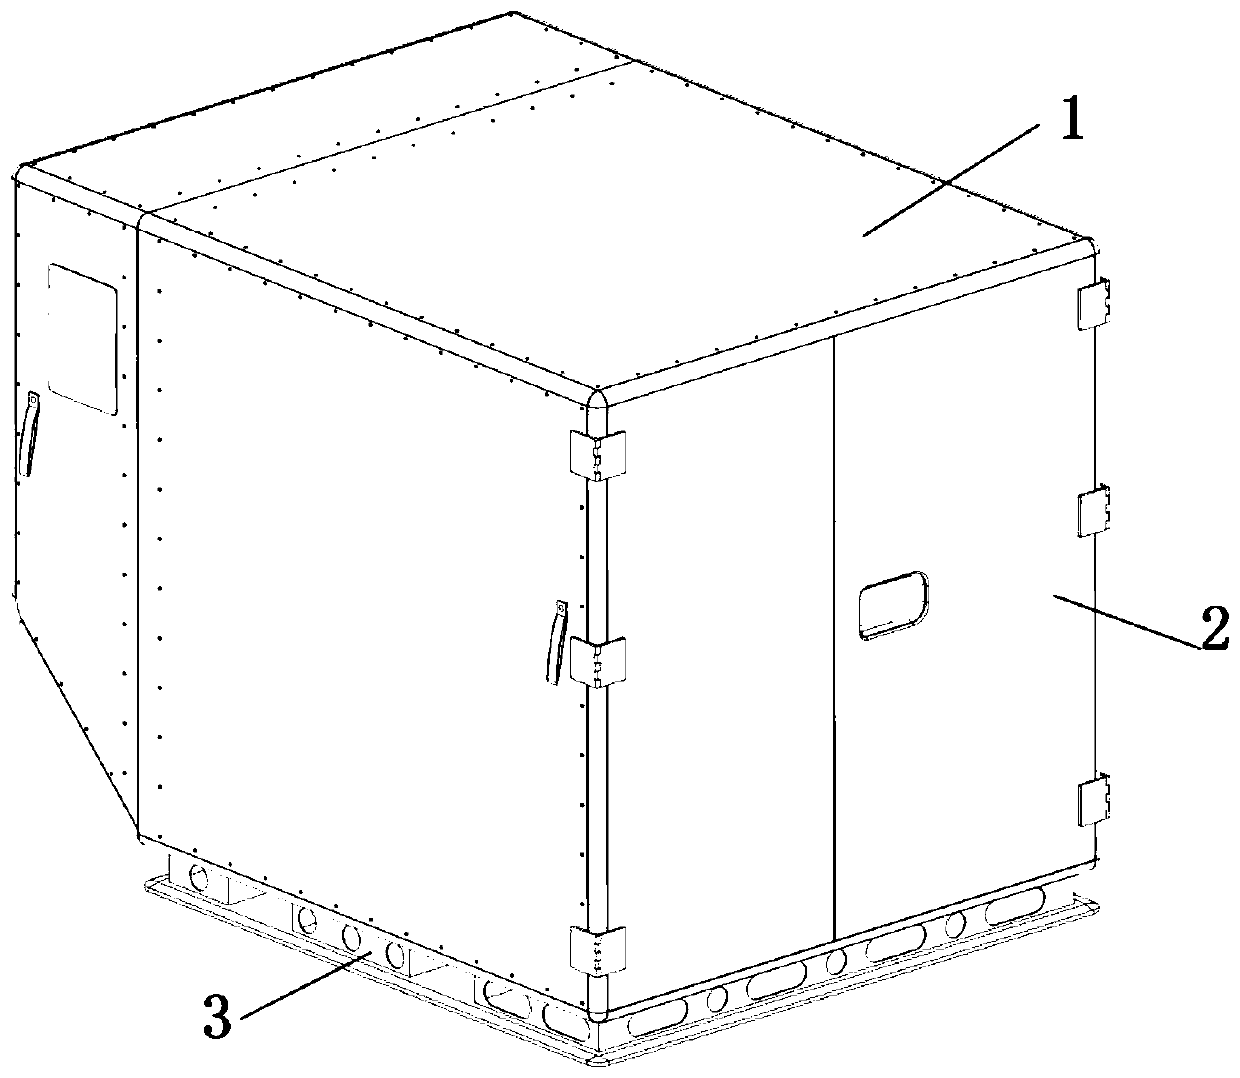 Entirely-foamed aviation cold-chain transport box comprising vacuum insulation boards